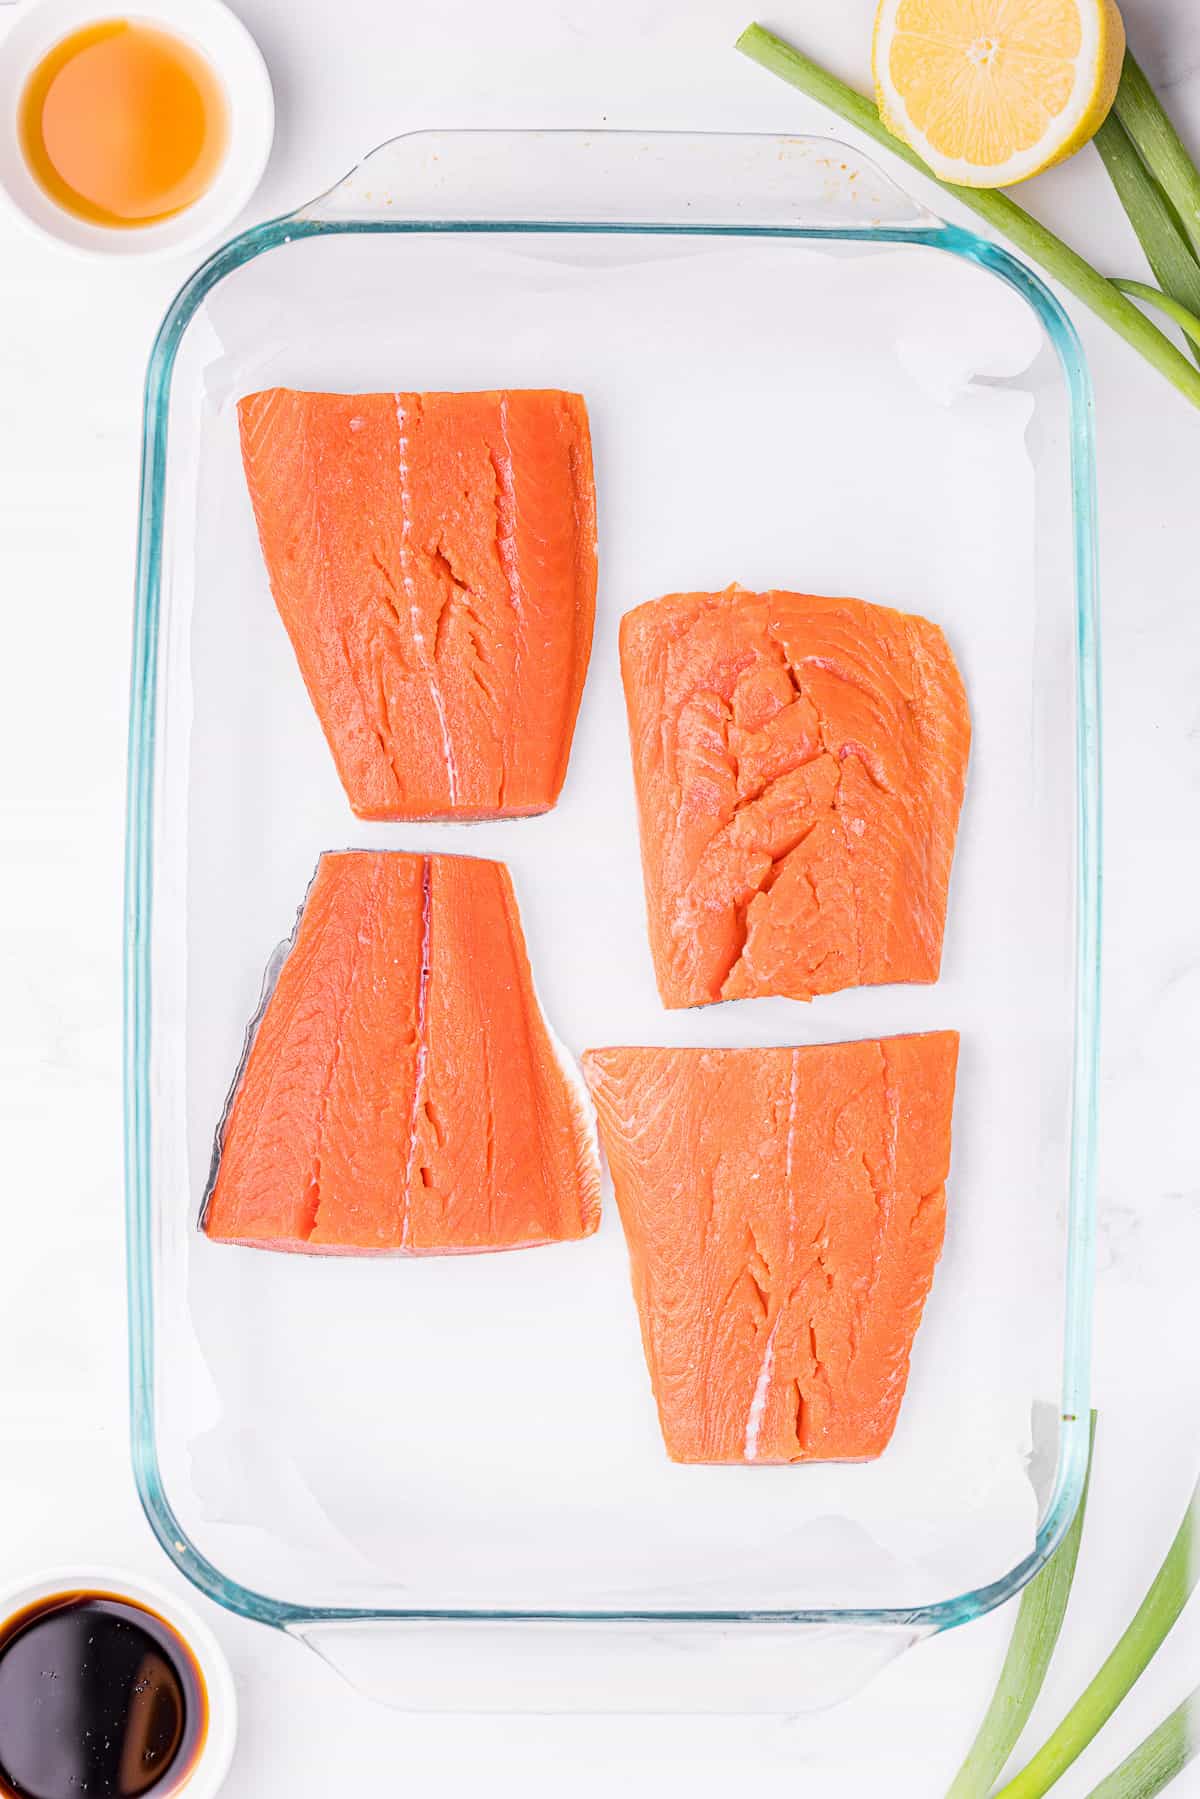 Salmon fillets arranged in a single layer on a parchment lined baking sheet ready for the oven.